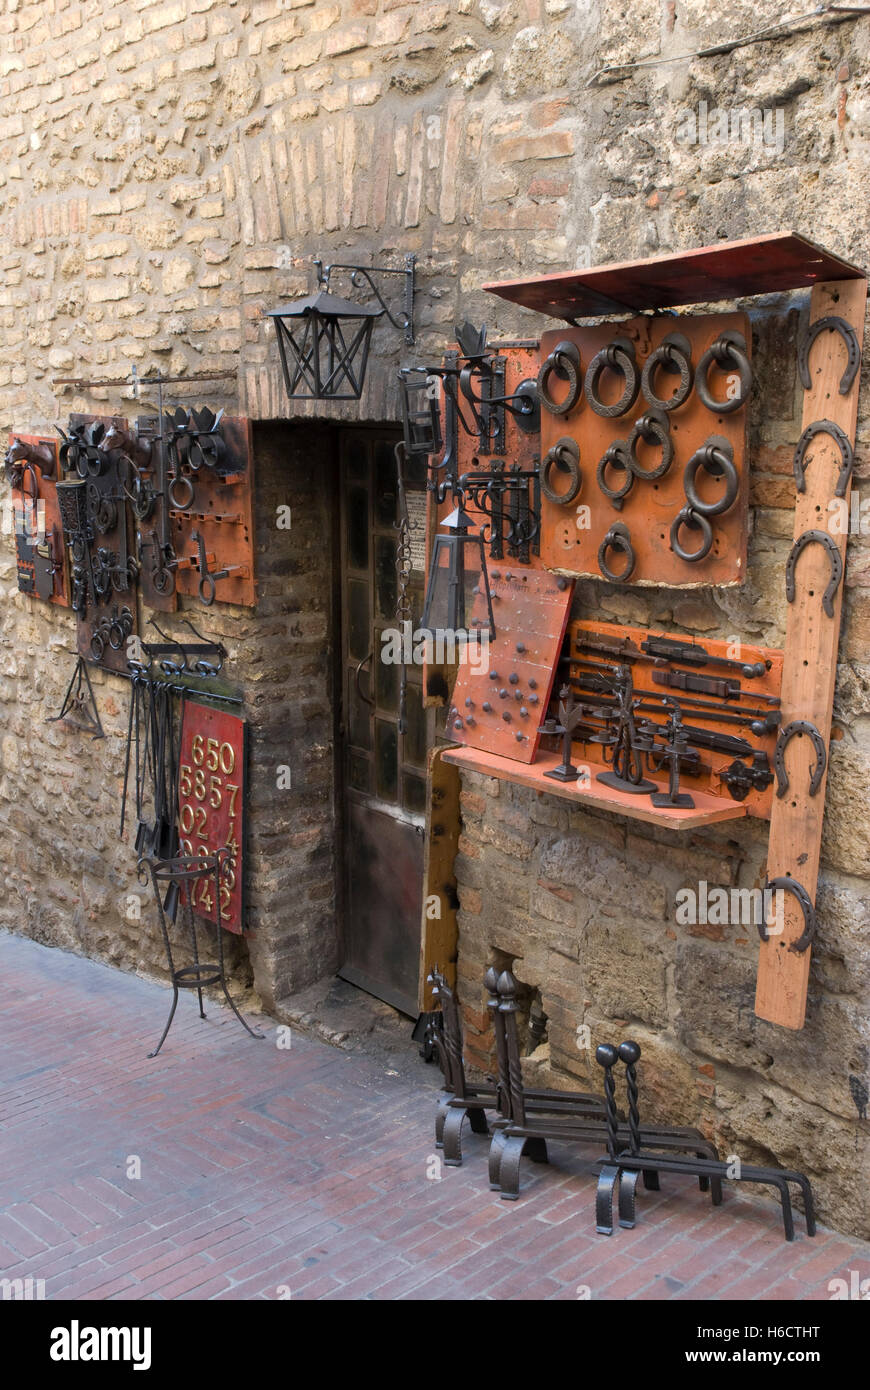 Hardware Store In An Alley In The Historic Town Centre Of San Gimignano H6CTHT 